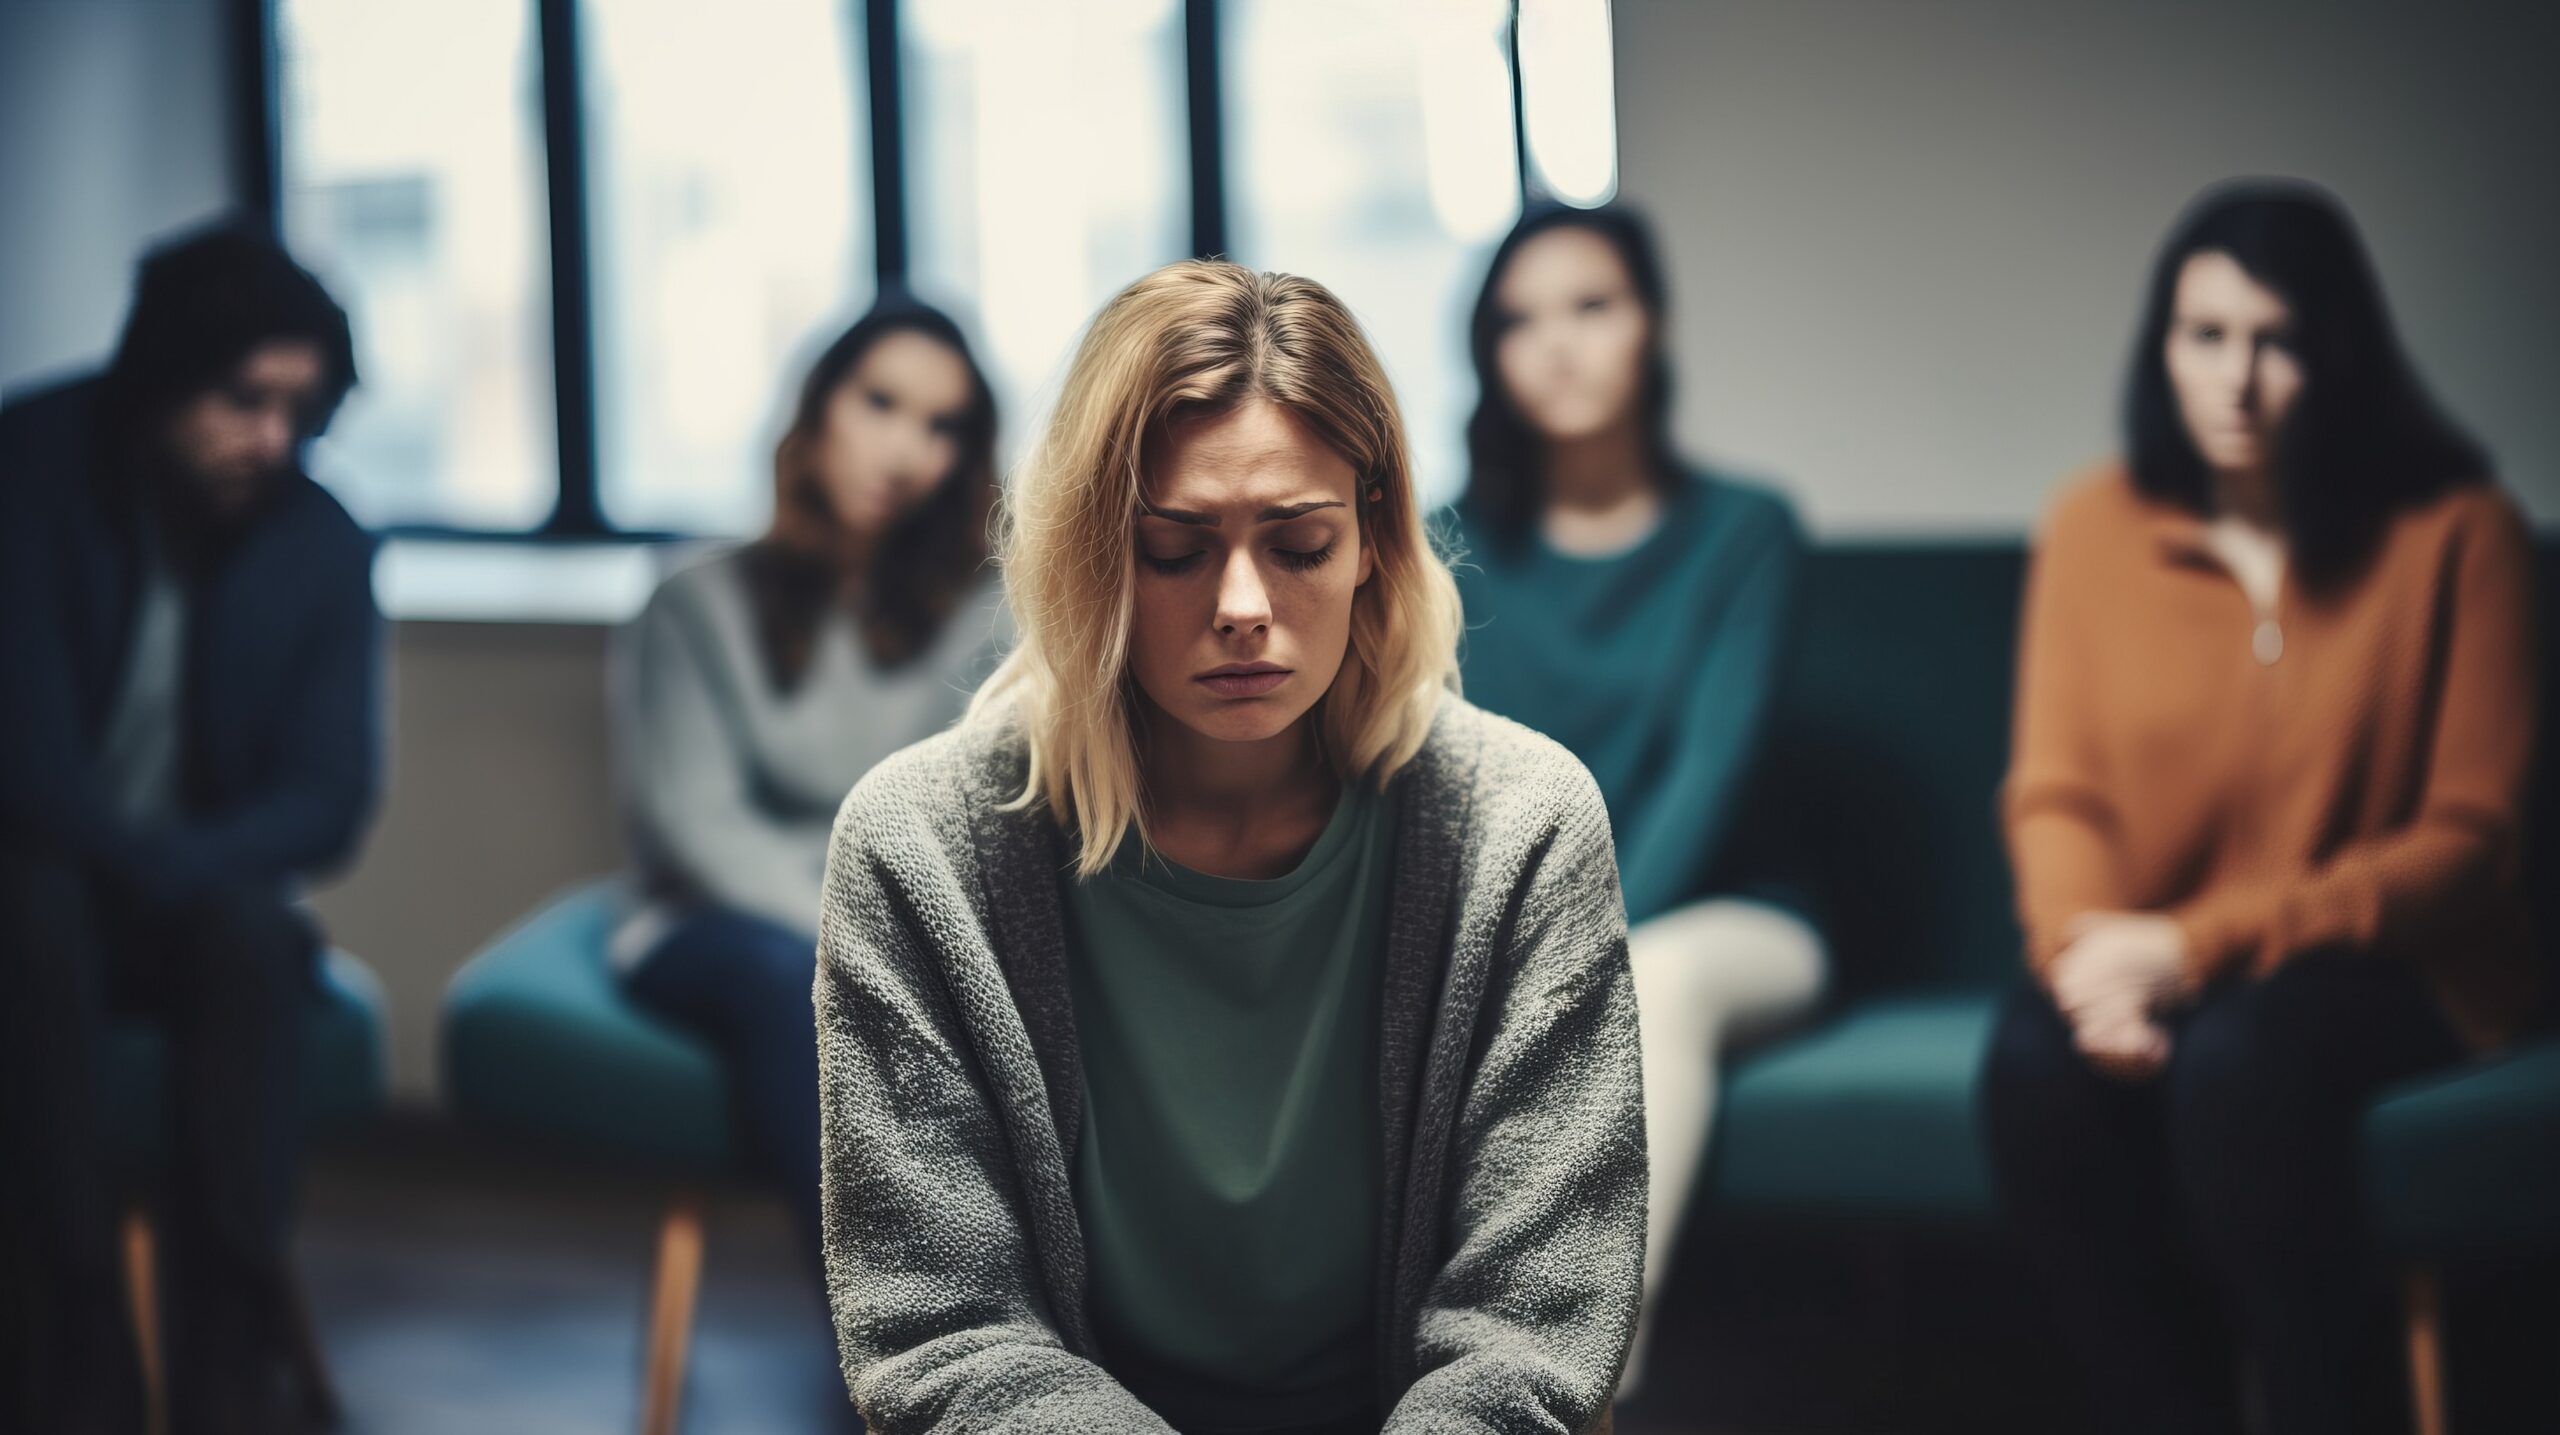 woman sad and depressed with group surrounding